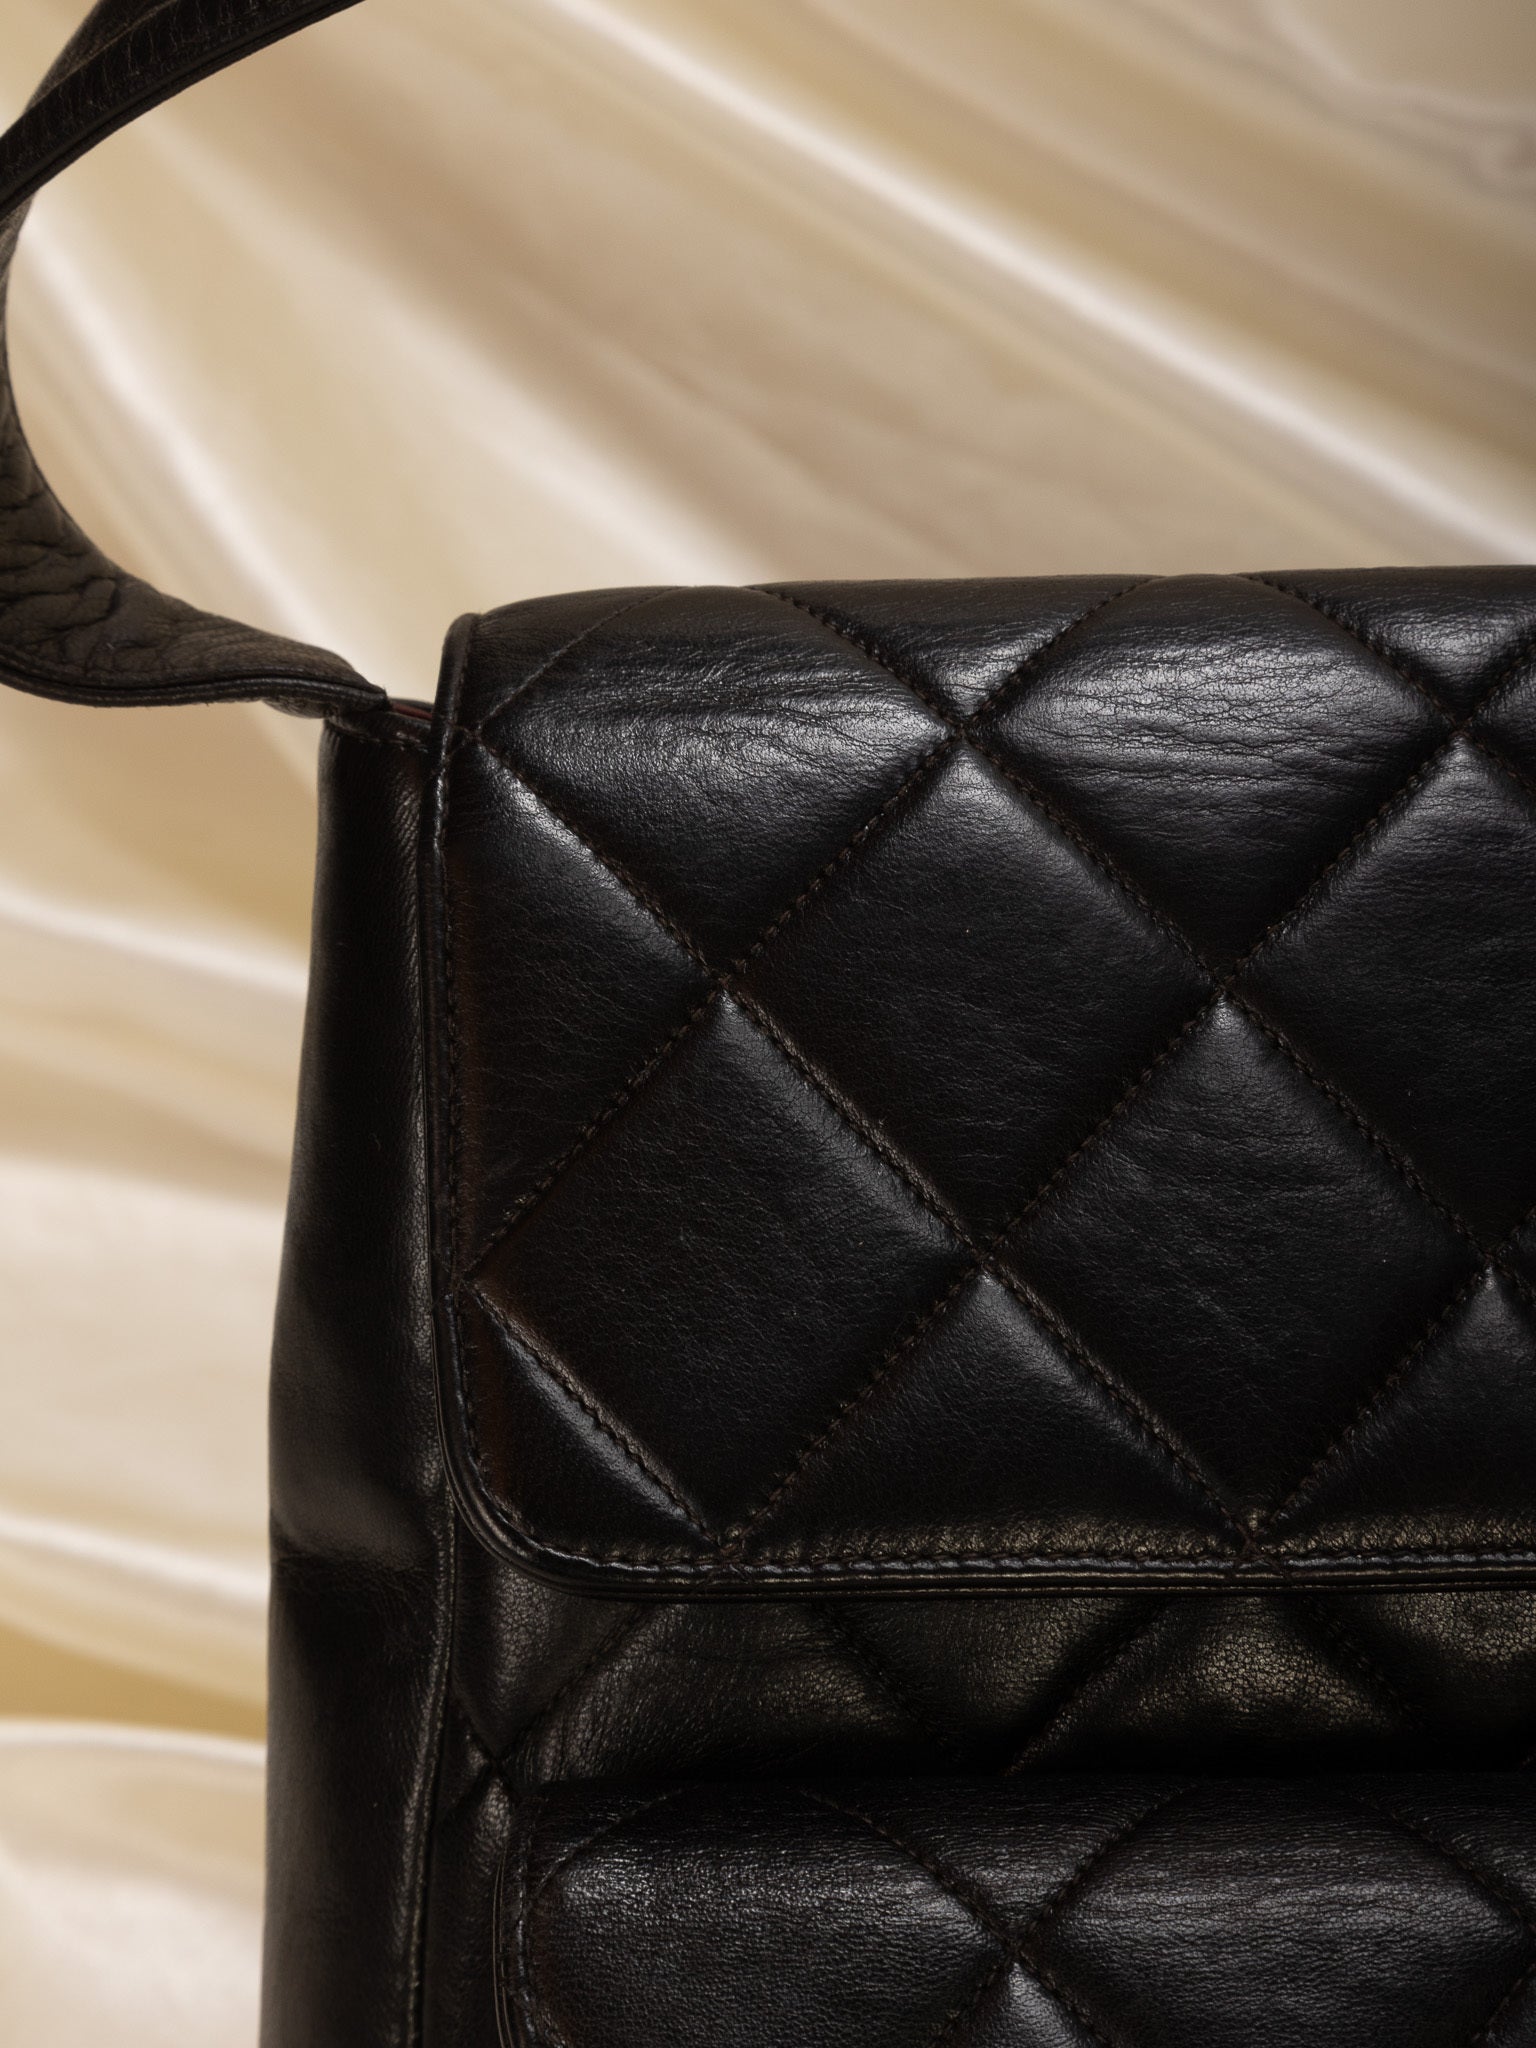 Extremely Rare Chanel Lambskin Double Turnlock Shoulder Bag